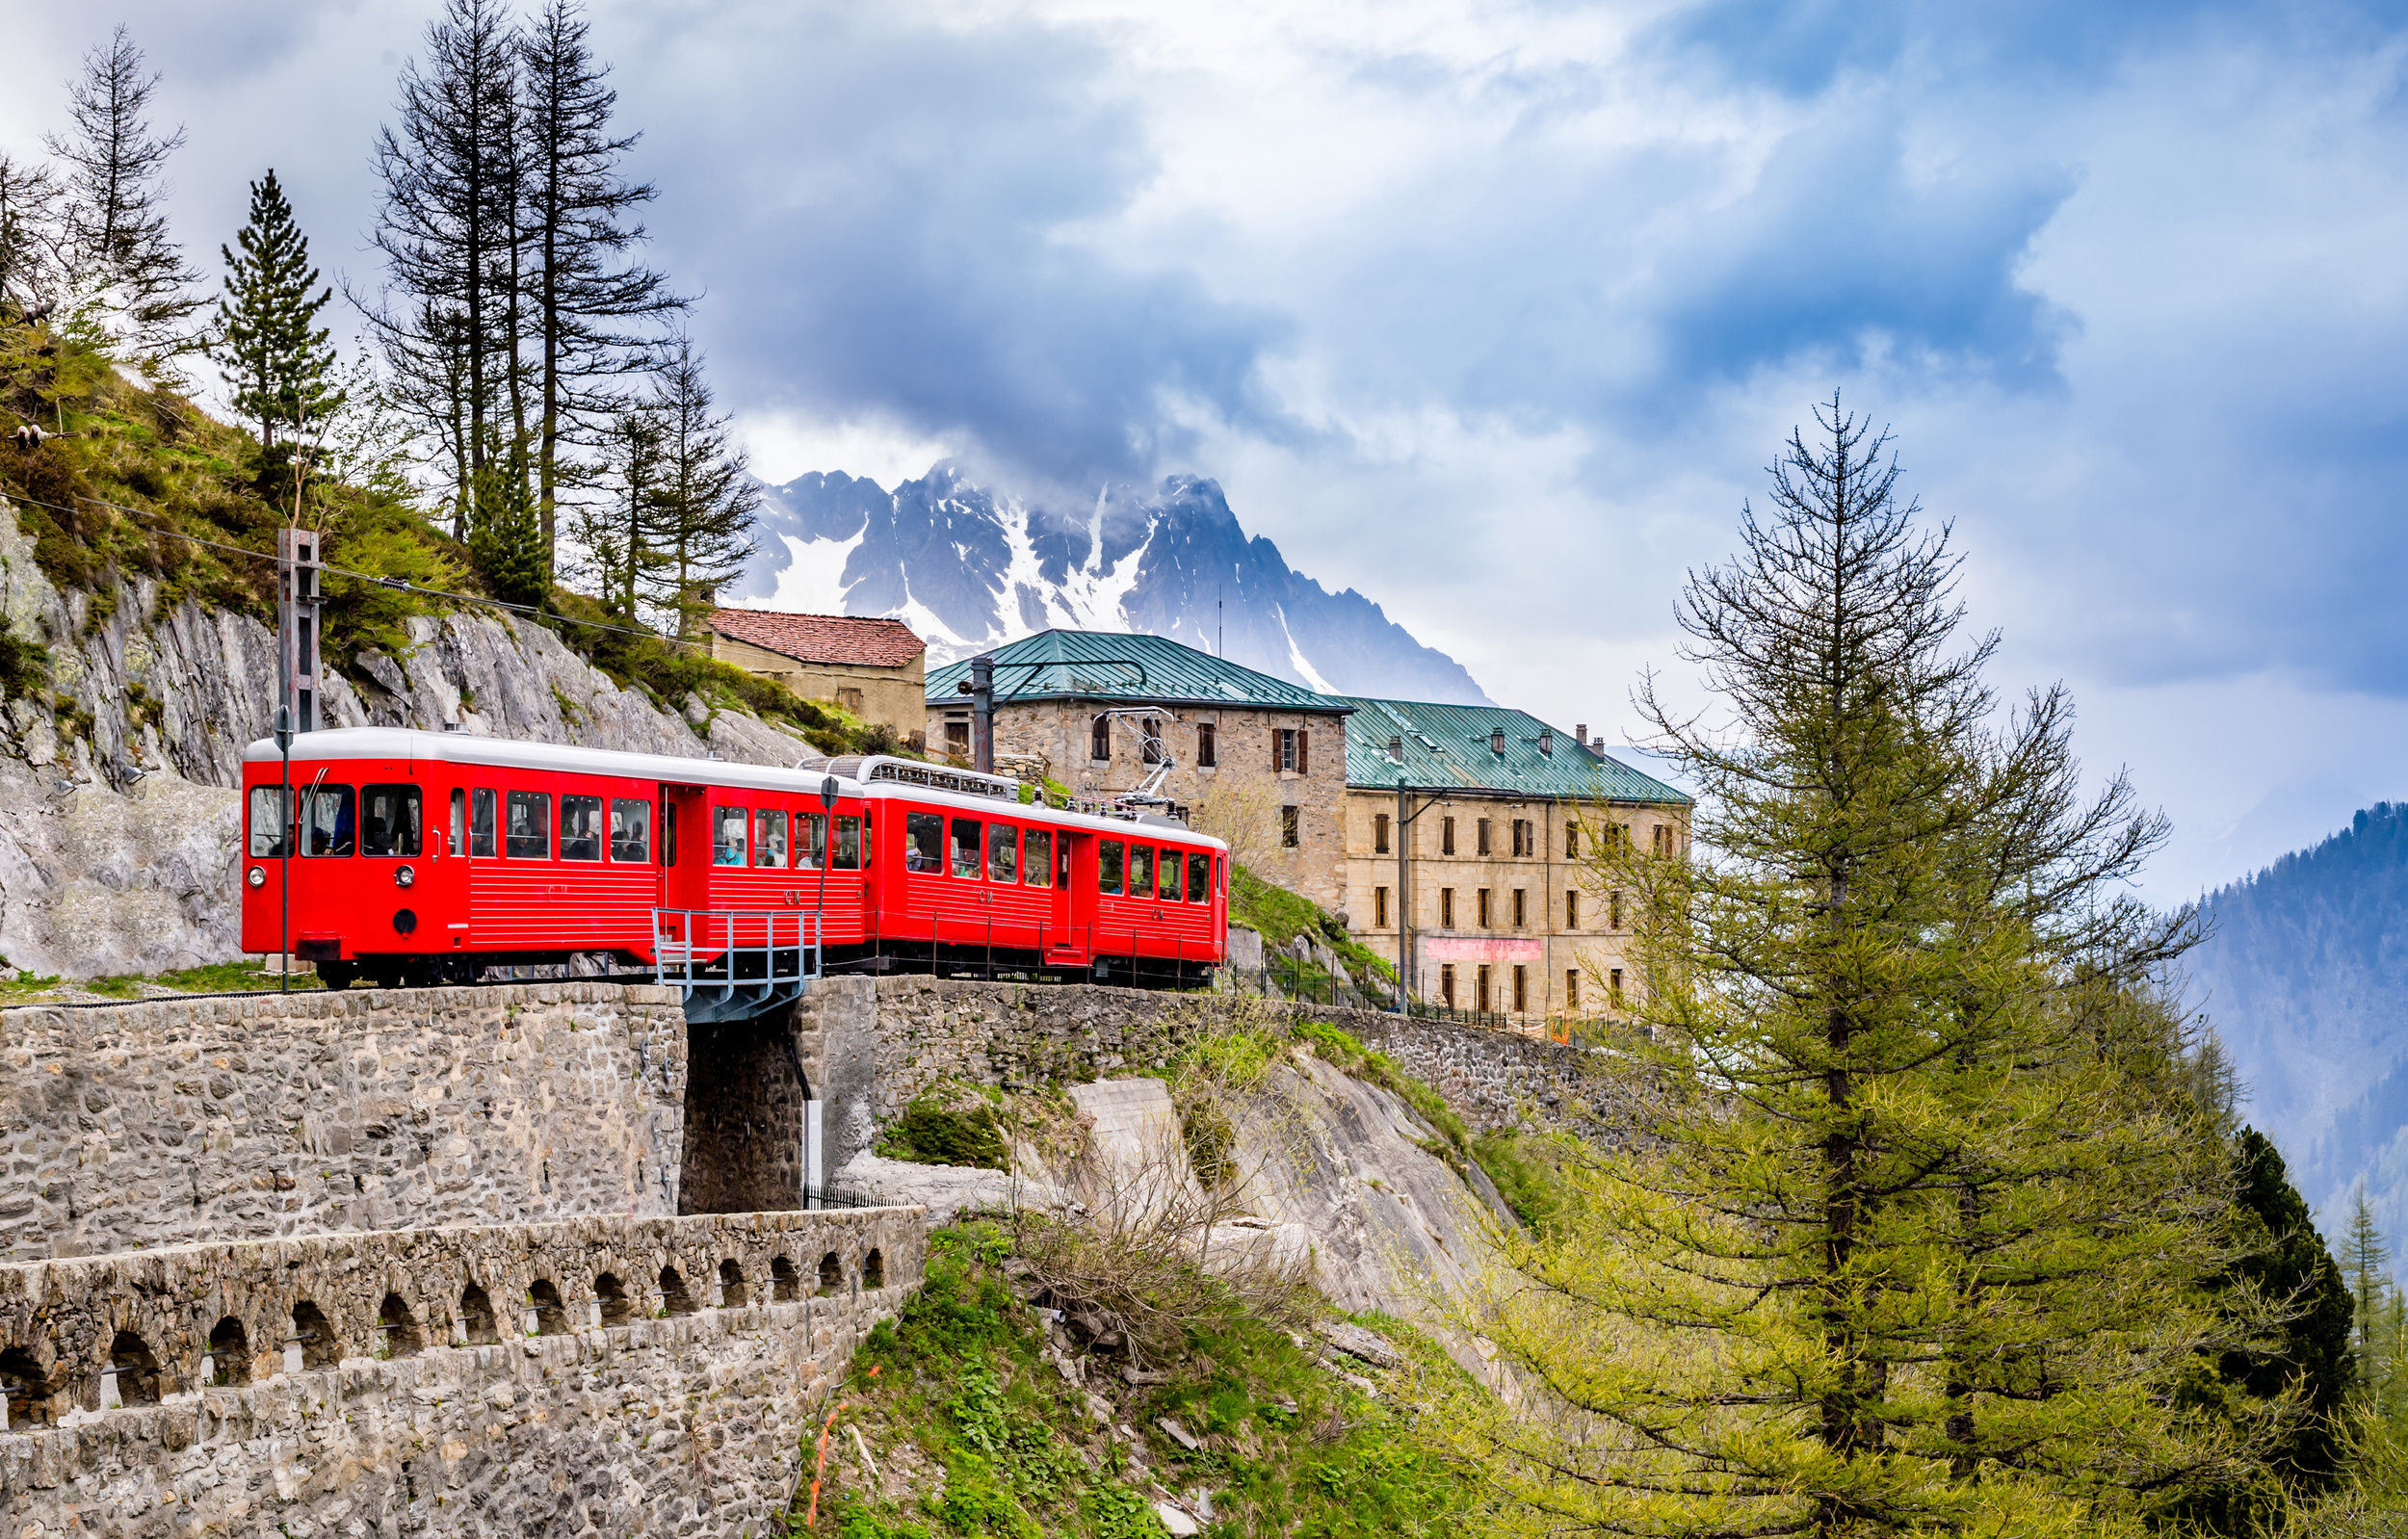 <p>Like its neighbor down south, the regional RER line through the French Alps is one of the best ways to see the mountains and villages. Relax in style and enjoy snowy peaks with a cup of hot chocolate aboard one of the many daily trains between alpine towns and cities.</p><p>You may also like: <a href='https://www.yardbarker.com/lifestyle/articles/15_things_you_must_do_in_florence_italy_031524/s1__37776650'>15 things you must do in Florence, Italy</a></p>